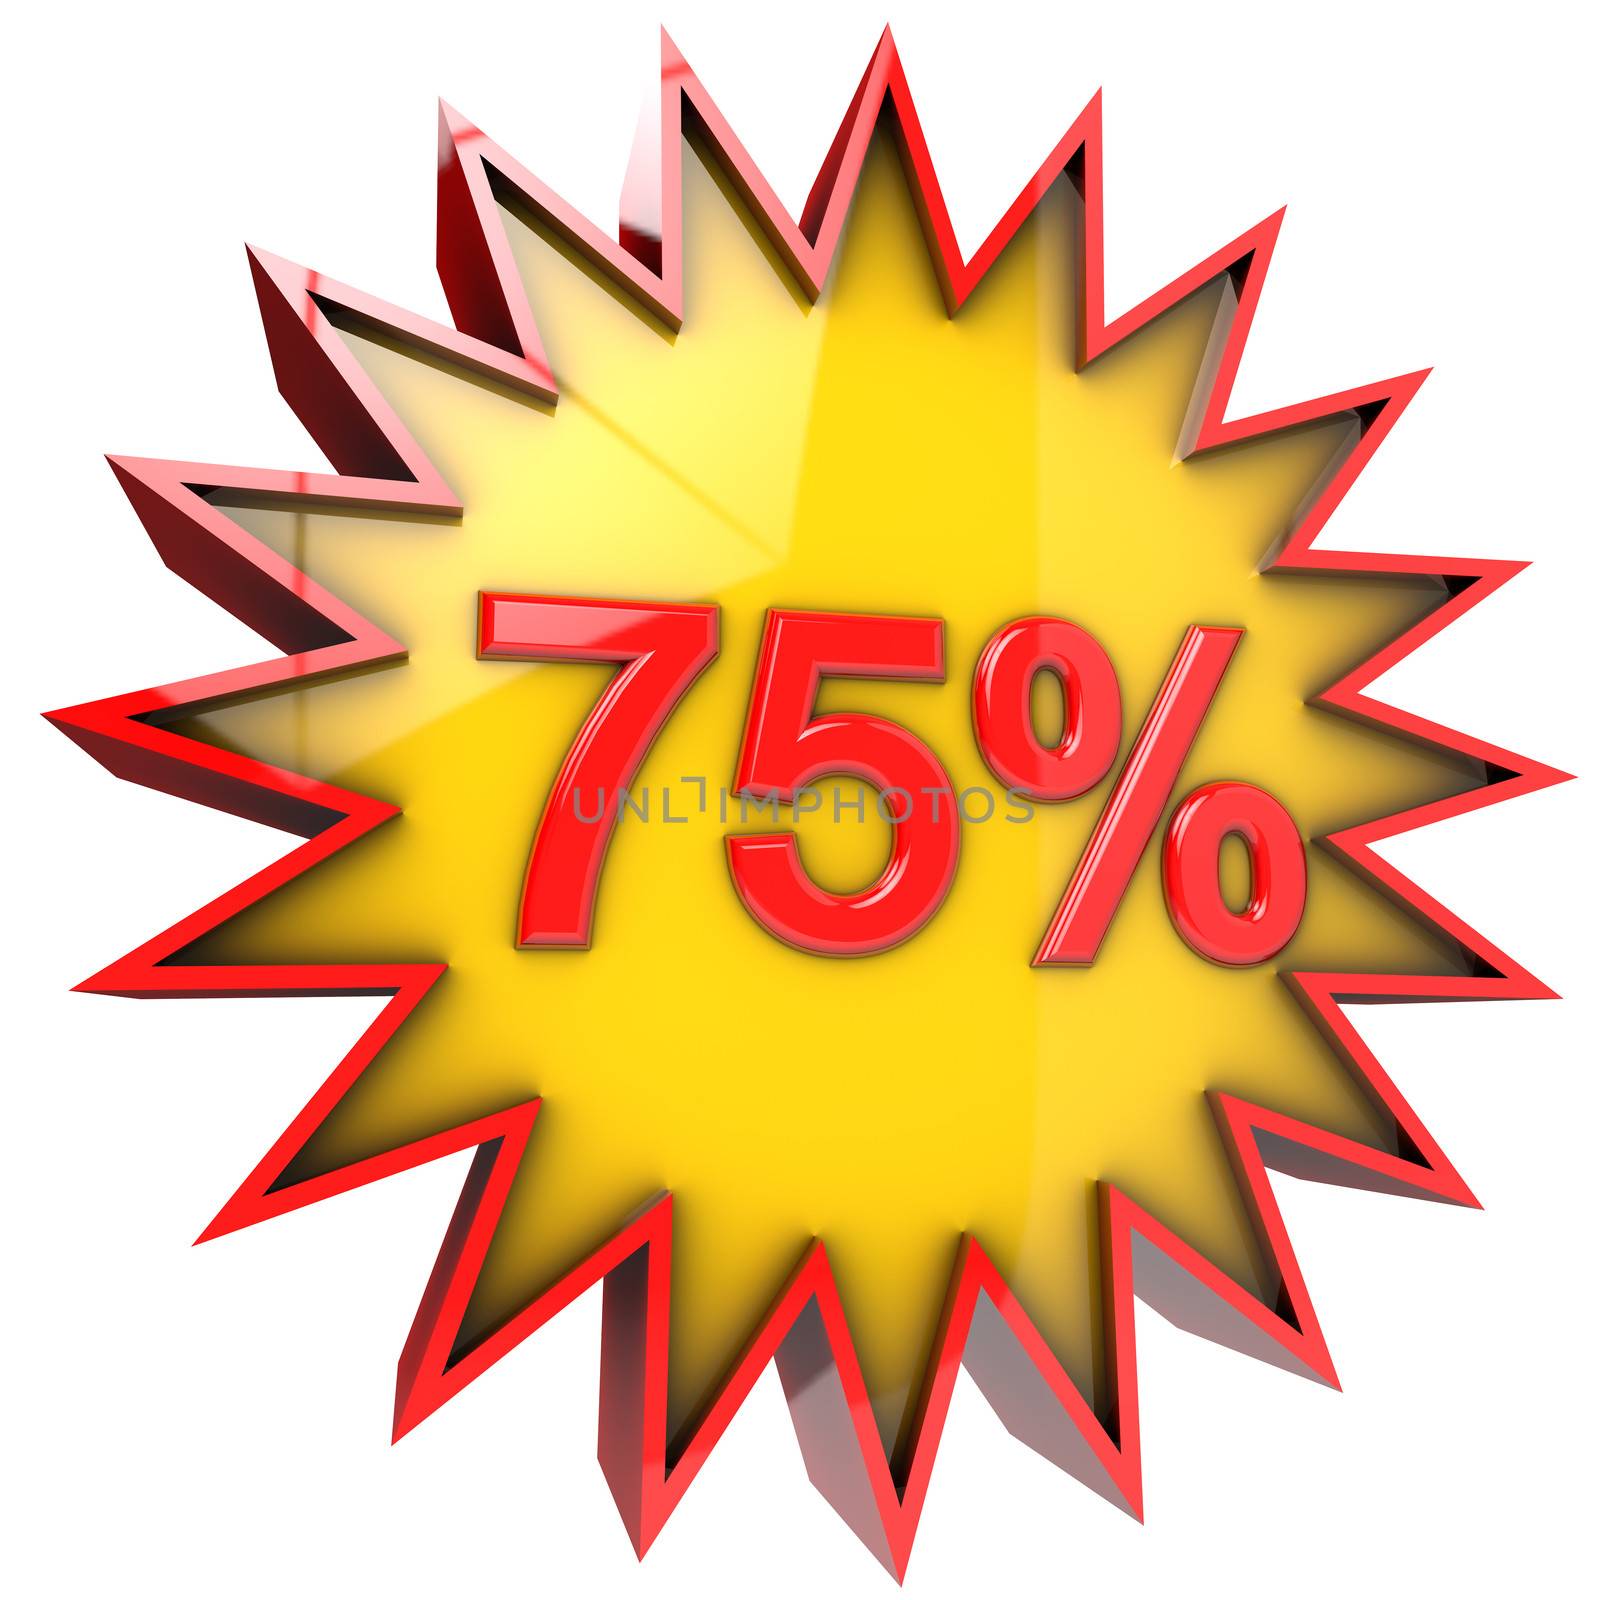 Discount Star seventy five percent in 3d isolated with clipping path and alpha channel